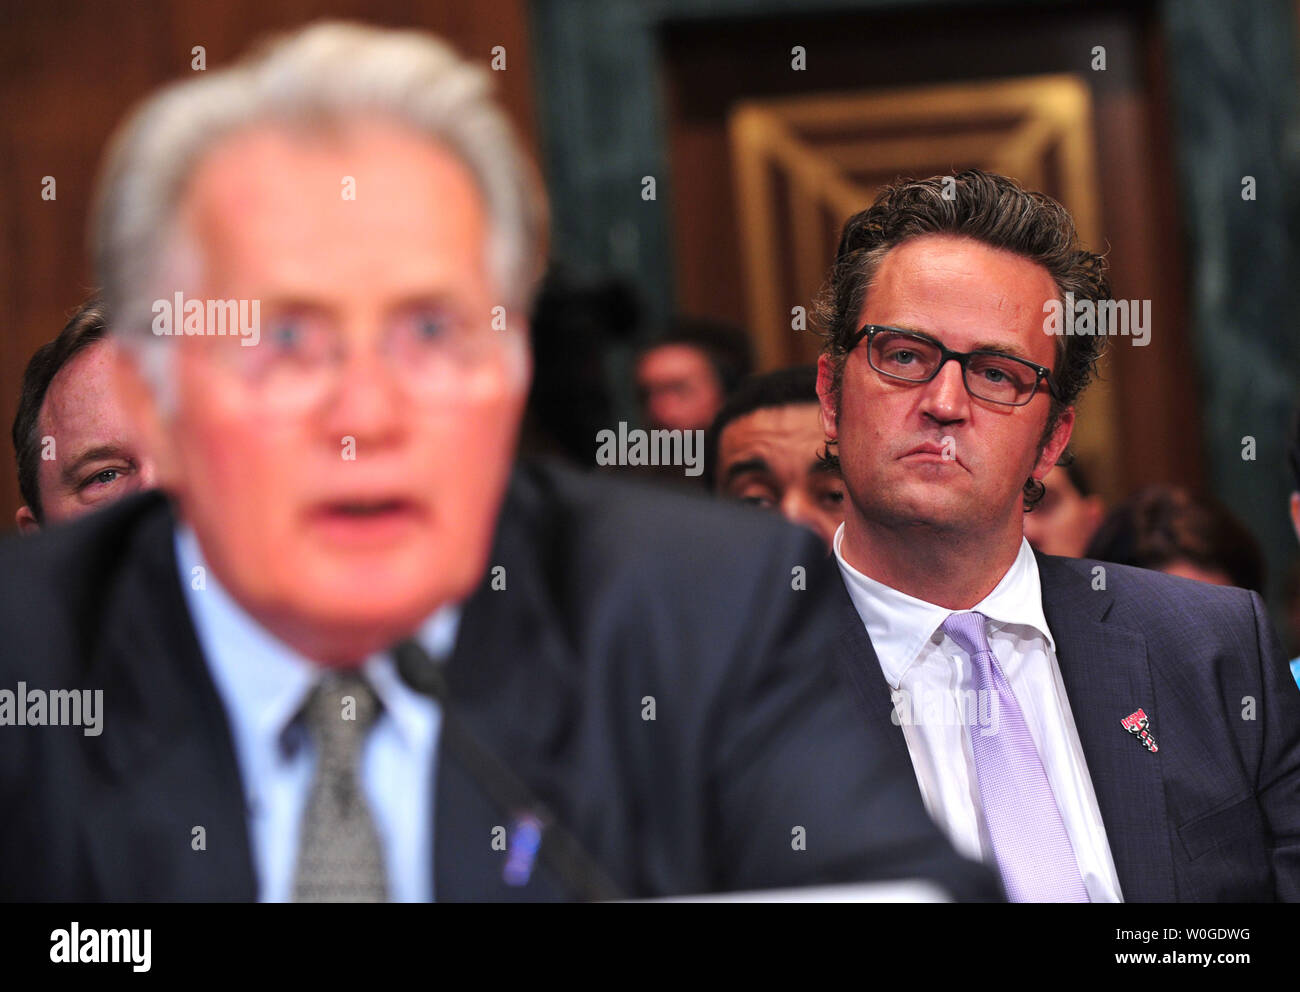 Actor Matthew Perry looks on as actor Martin Sheen testifies before a Senate Judiciary Committee Crime and Judiciary Subcommittee hearing titled 'Drug and Veterans Treatment Courts: Seeking Cost-Effective Solutions for Protecting Public Safety and Reducing Recidivism,' on Capitol Hill in Washington, D.C. on July 19, 2011.  UPI/Kevin Dietsch Stock Photo